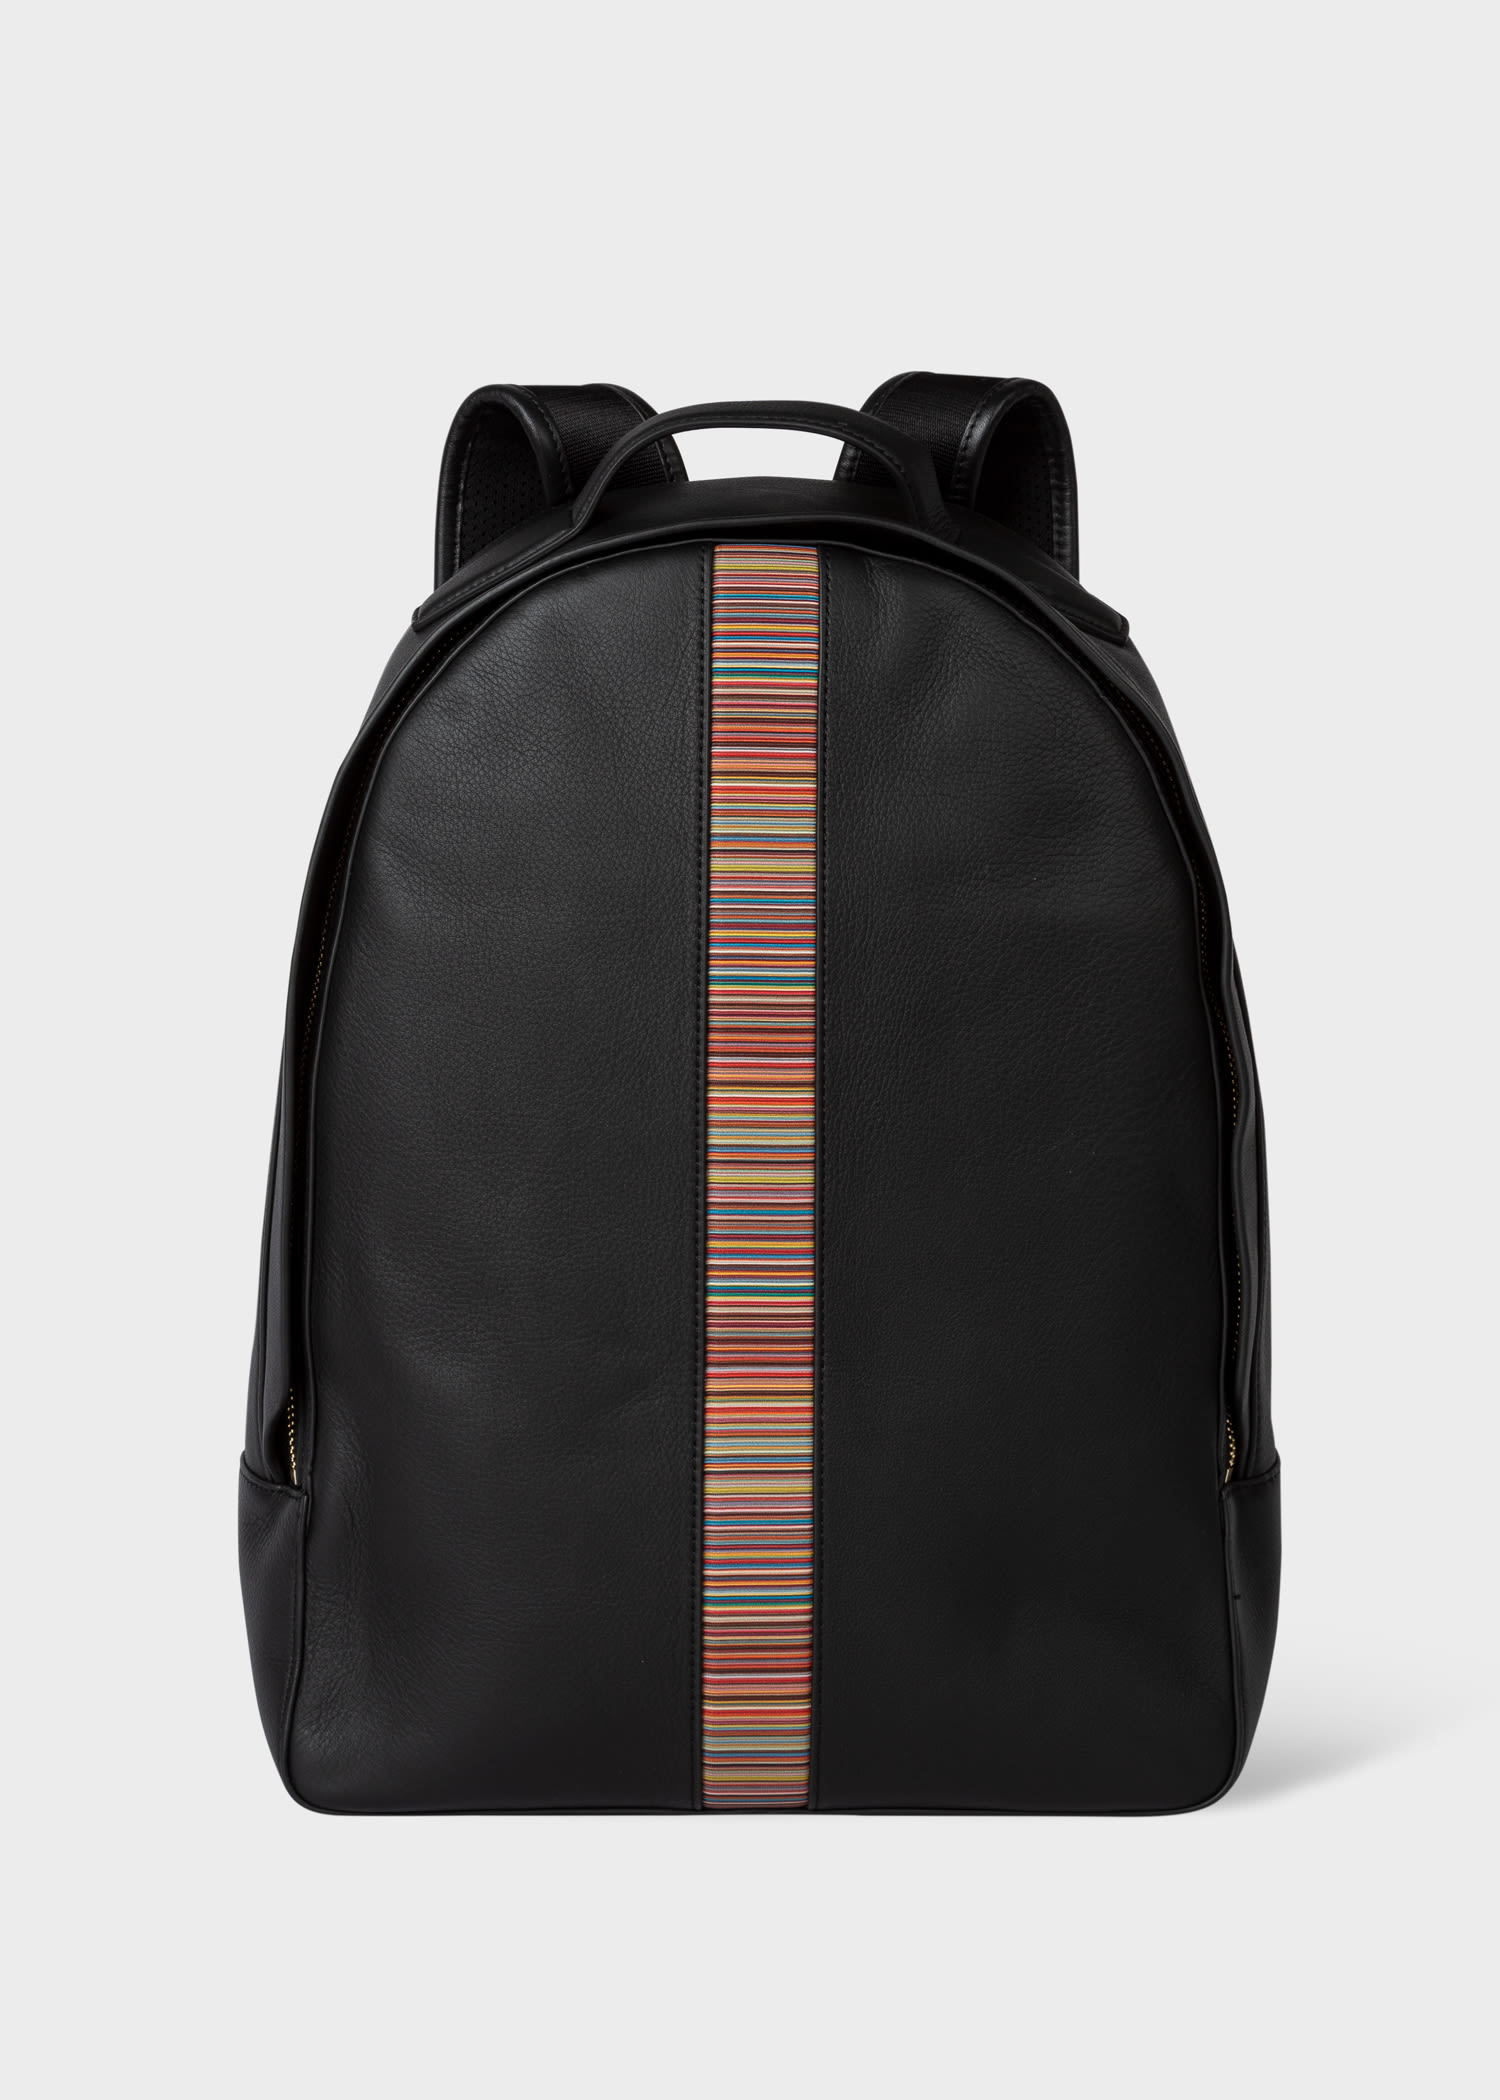 Paul Smith Men's Striped Leather Bag